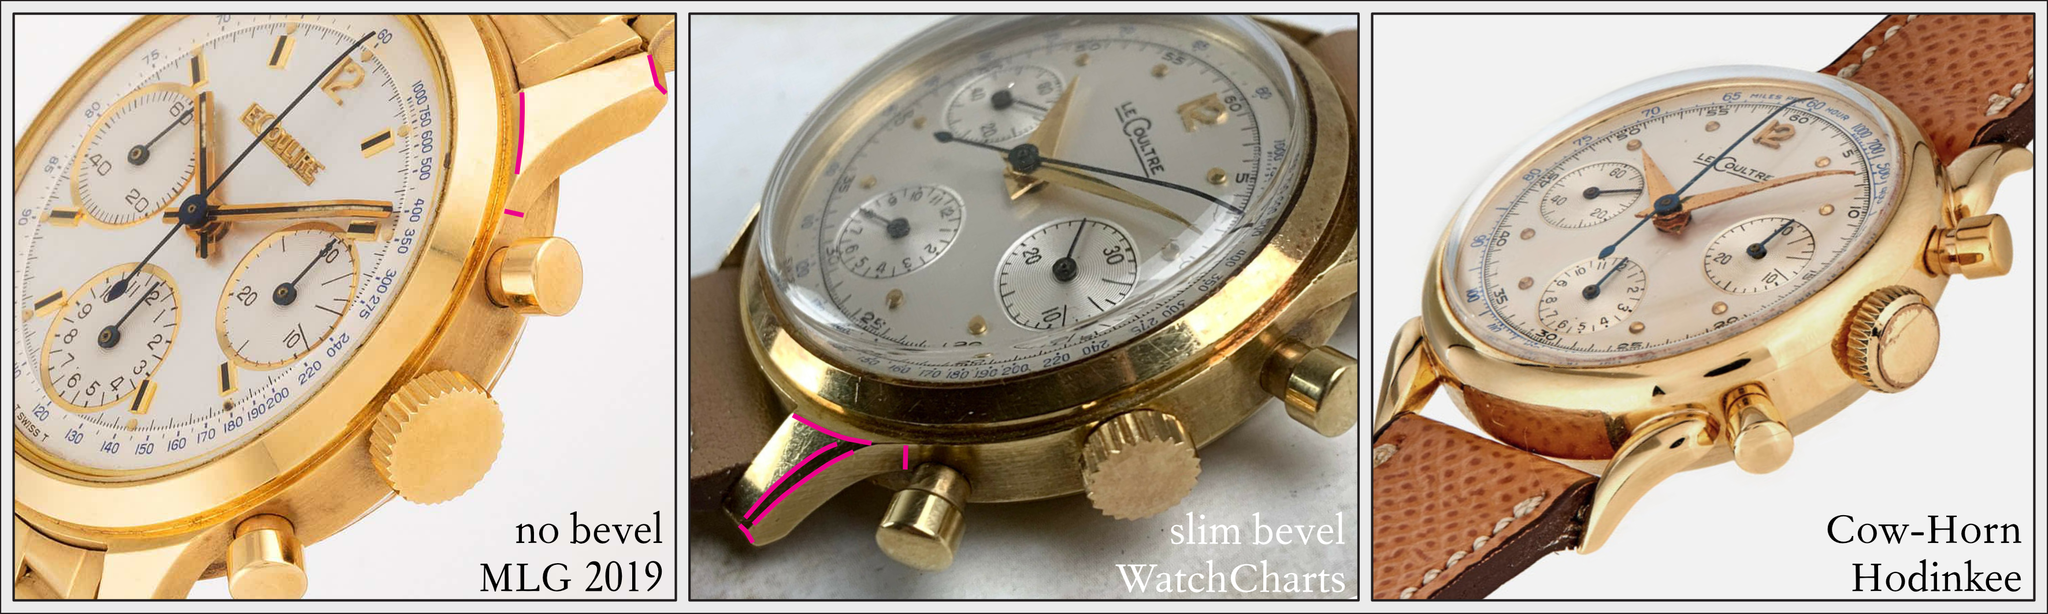 Comparing the cases on three yellow gold LeCoultre chronograph pieces and their respective lug styles